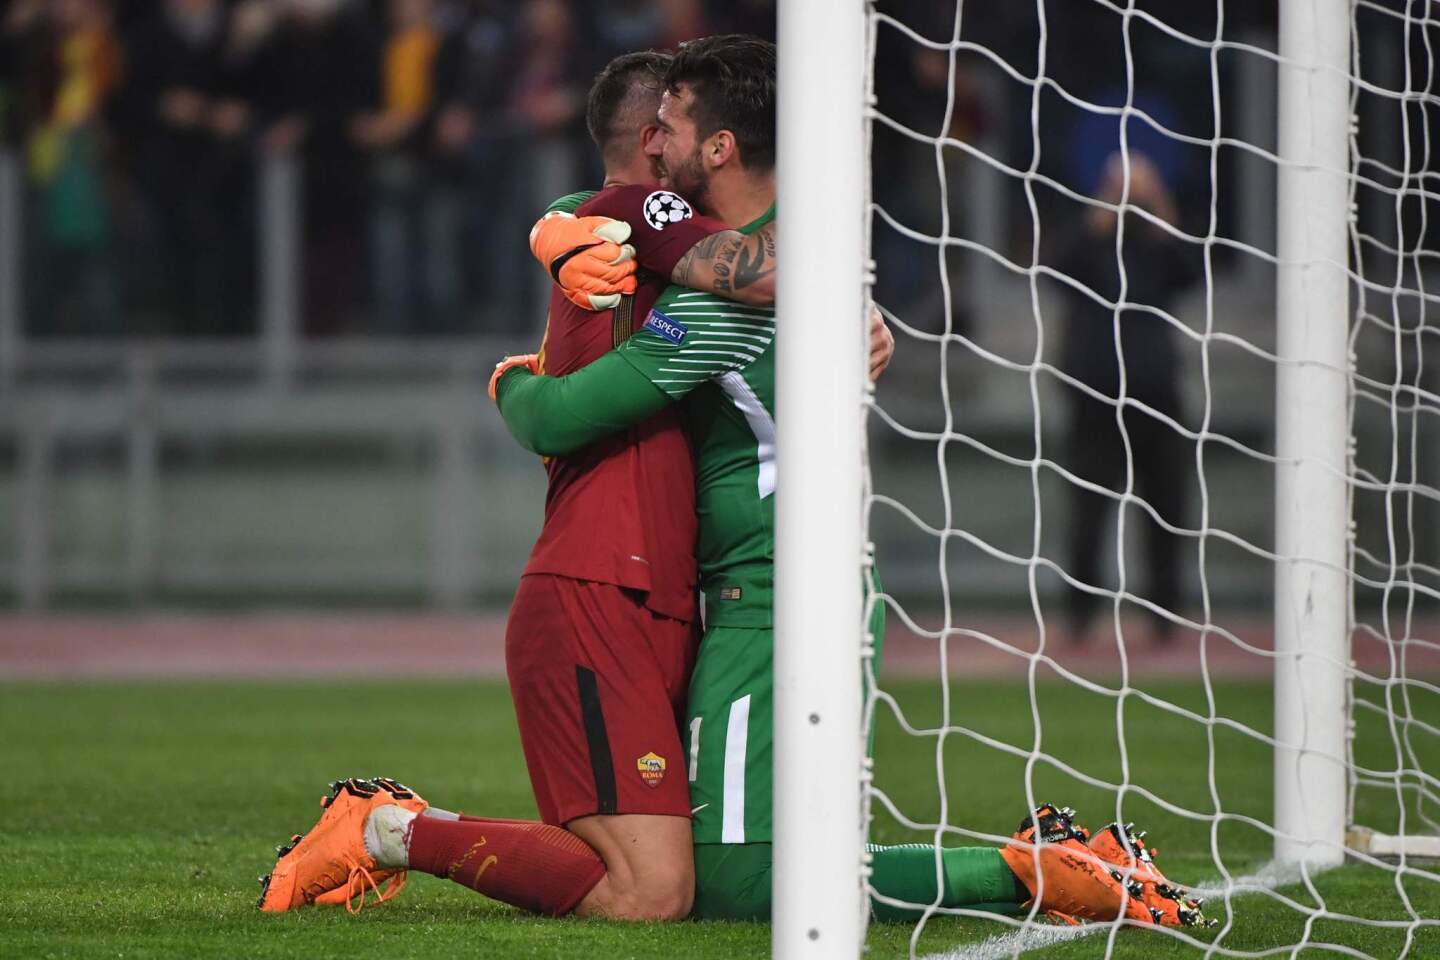 AS Roma's Serbian defender Aleksandar Kolarov (L) and AS Roma's Brazilian goalkeeper Alisson Becker celebrate their victory at the end of the UEFA Champions League quarter-final second leg football match between AS Roma and FC Barcelona at the Olympic Stadium in Rome on April 10, 2018.